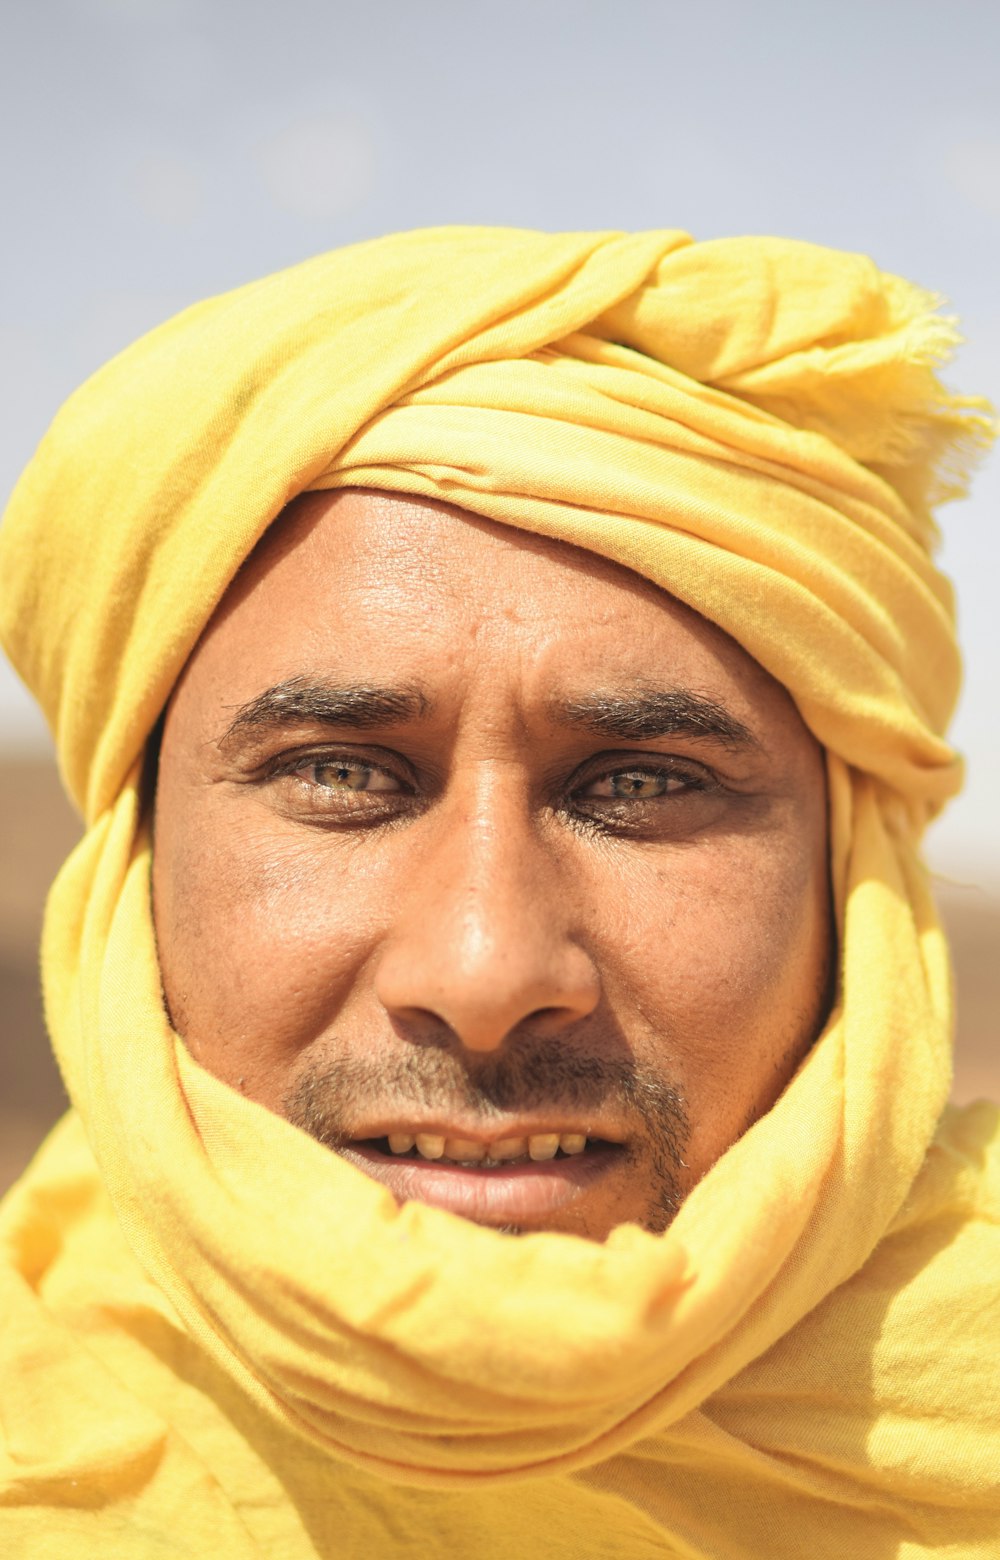 a man in a yellow turban smiles for the camera